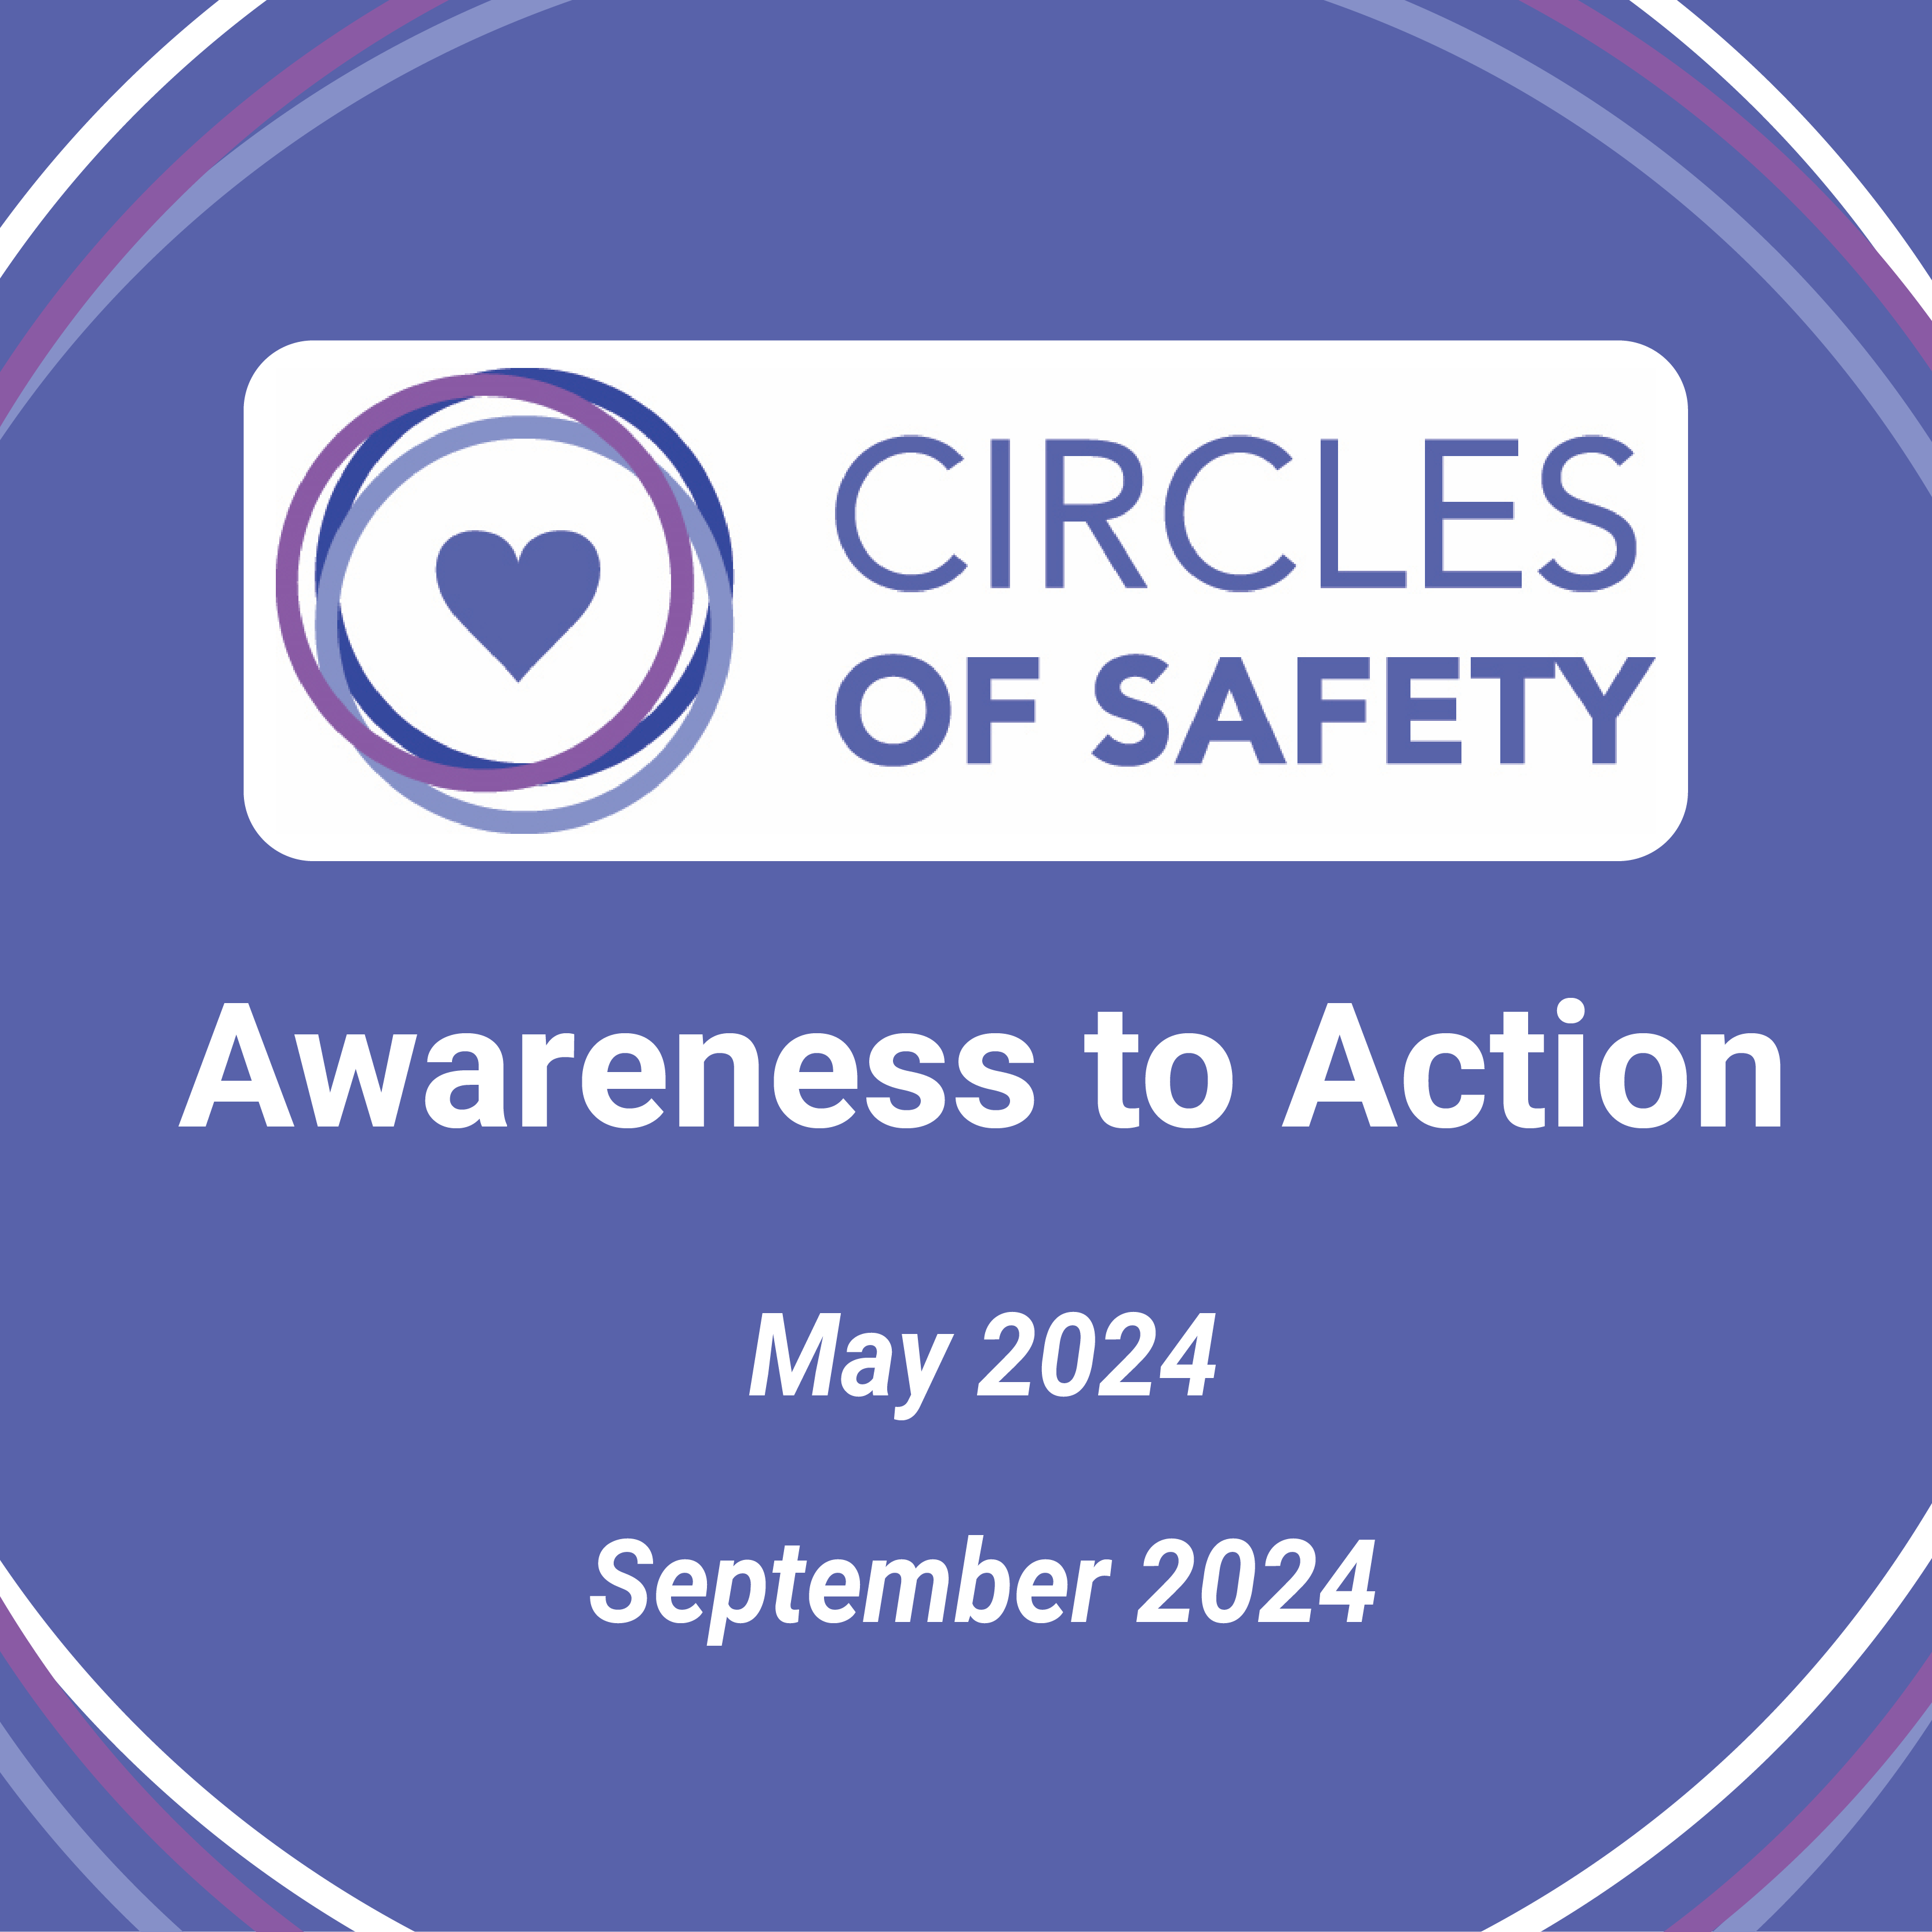 awareness_to_action_square_may-september_2024-10-10.png